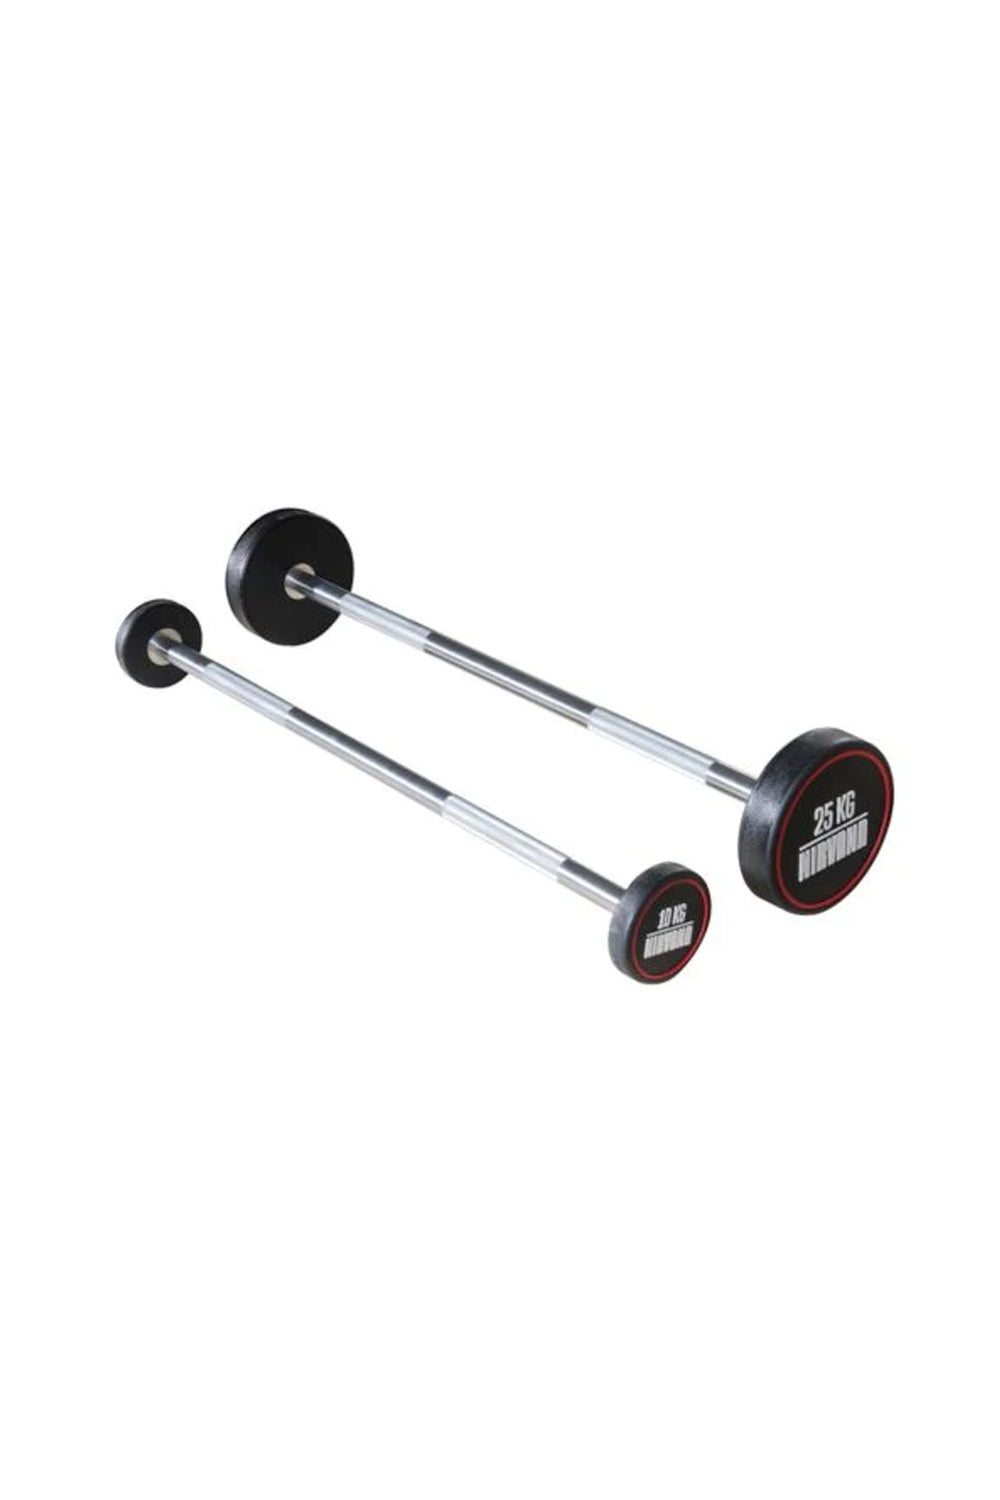 Two Nirvana fixed weight straight bar